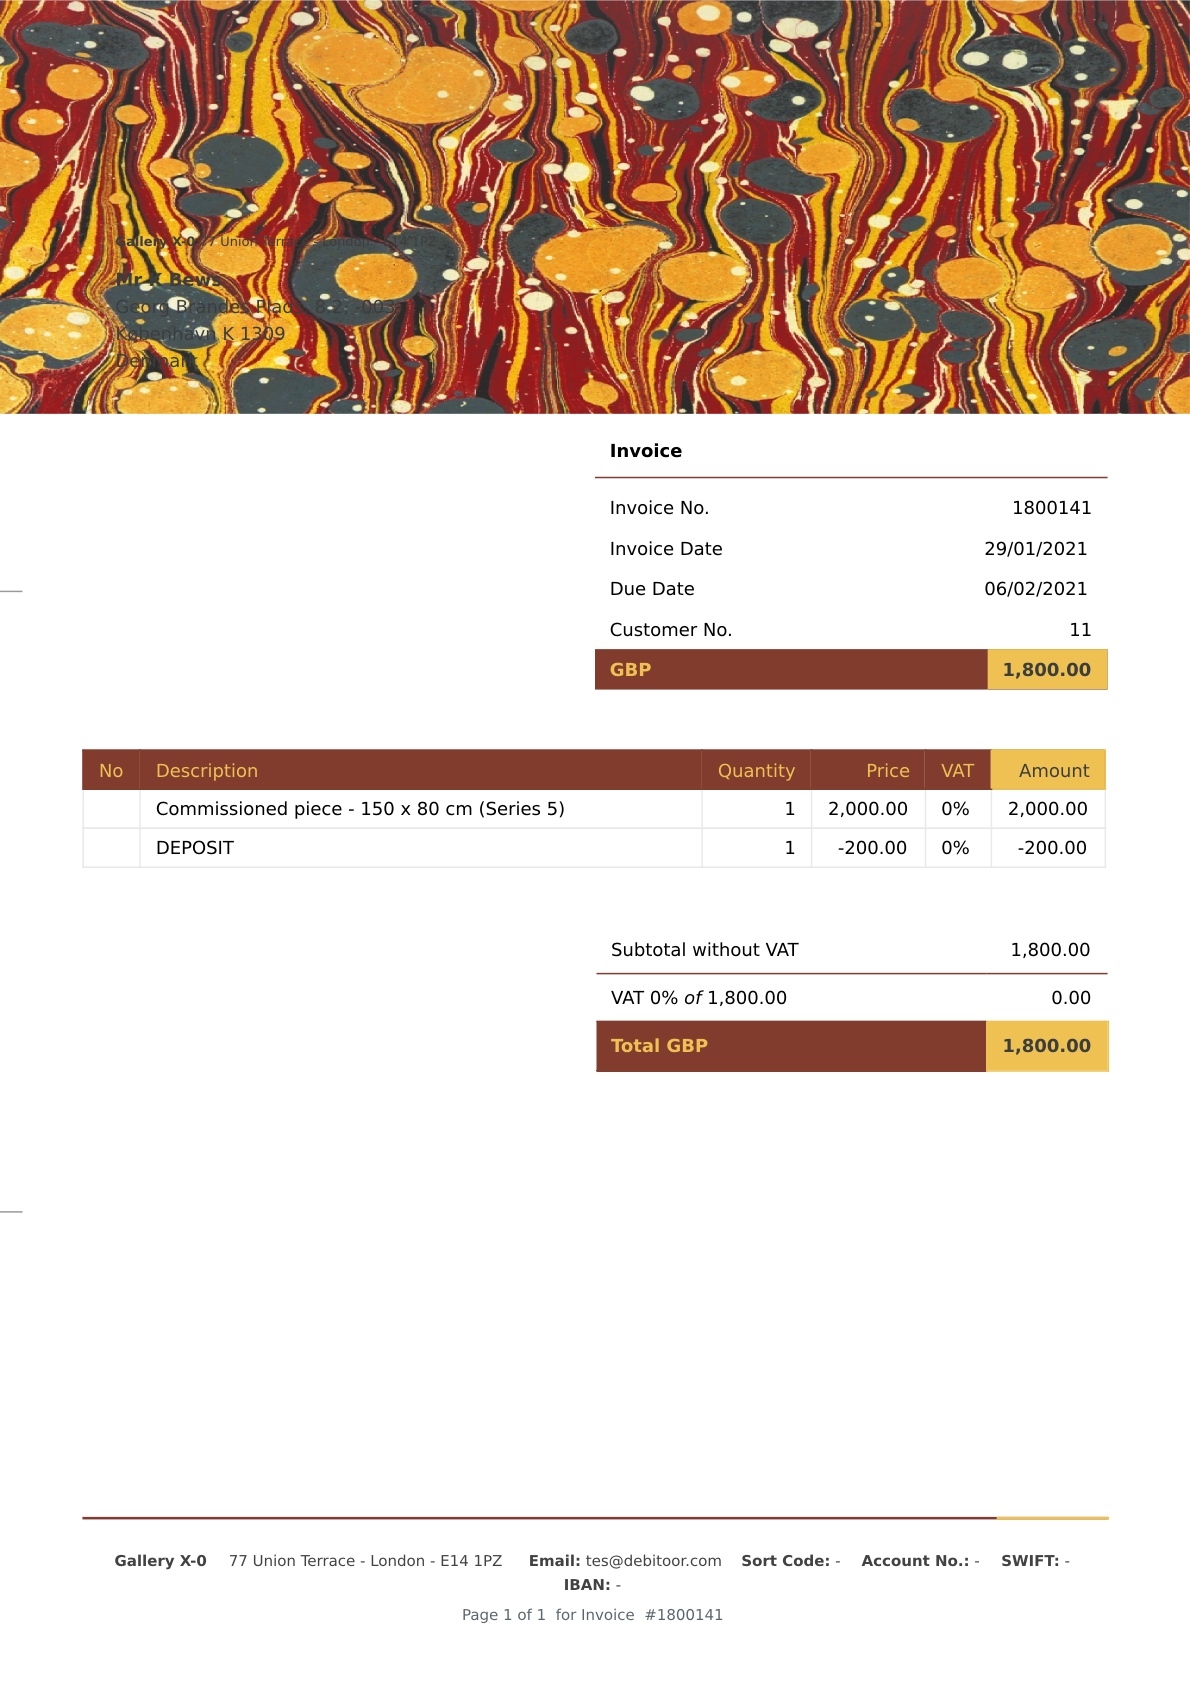 Here is an example of how an invoice should look if you have already requested a deposit from a customer.